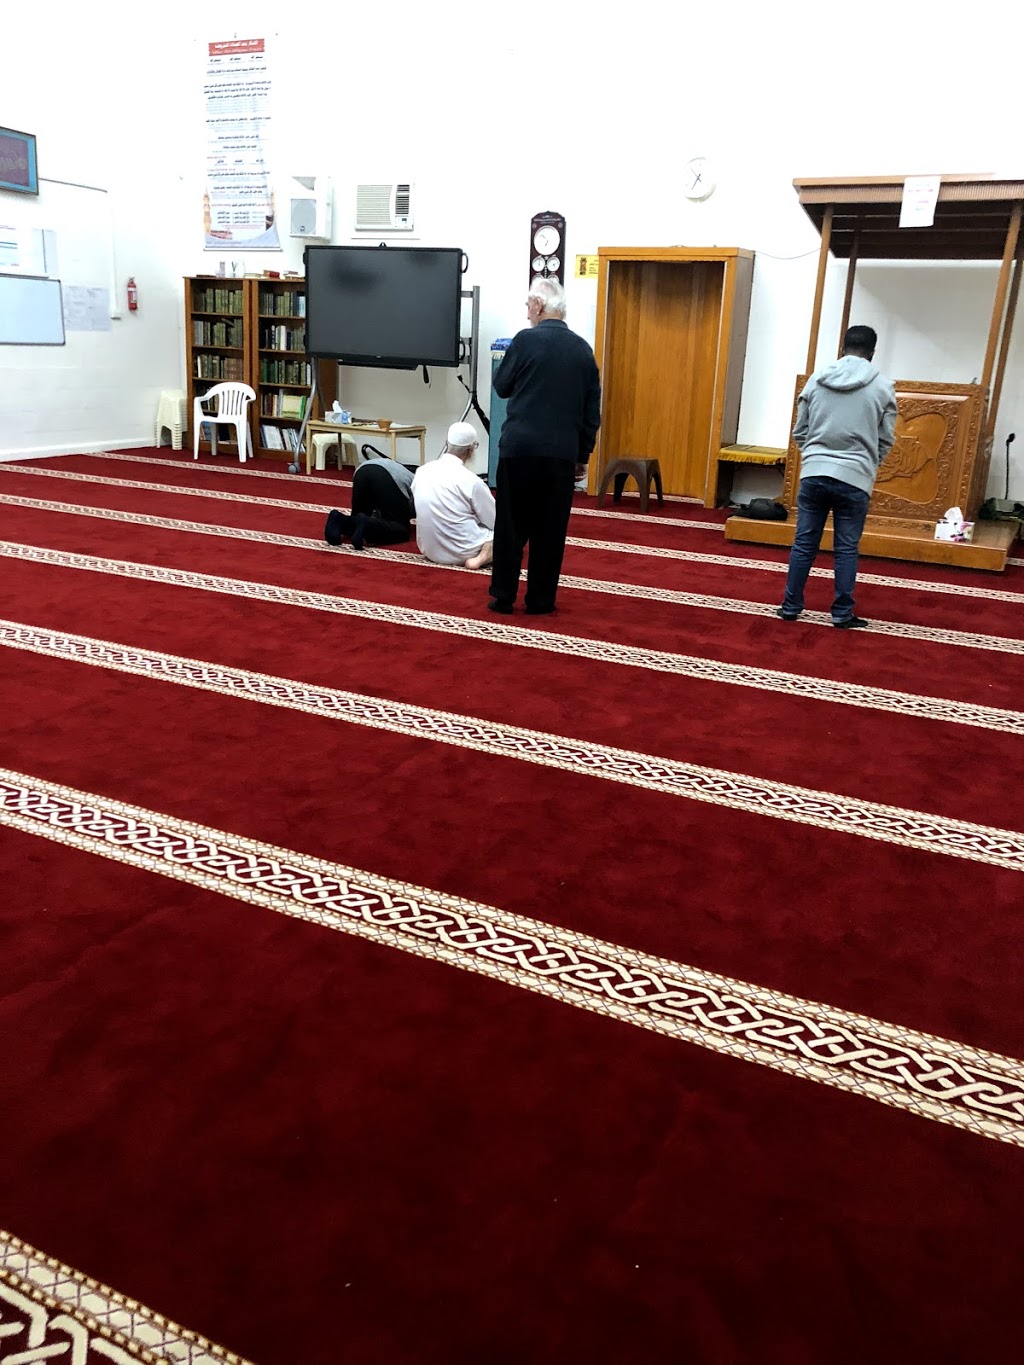 Canberra Islamic Centre (CIC) Mosque | mosque | 221 Clive Steele Ave, Monash ACT 2904, Australia | 0262920602 OR +61 2 6292 0602